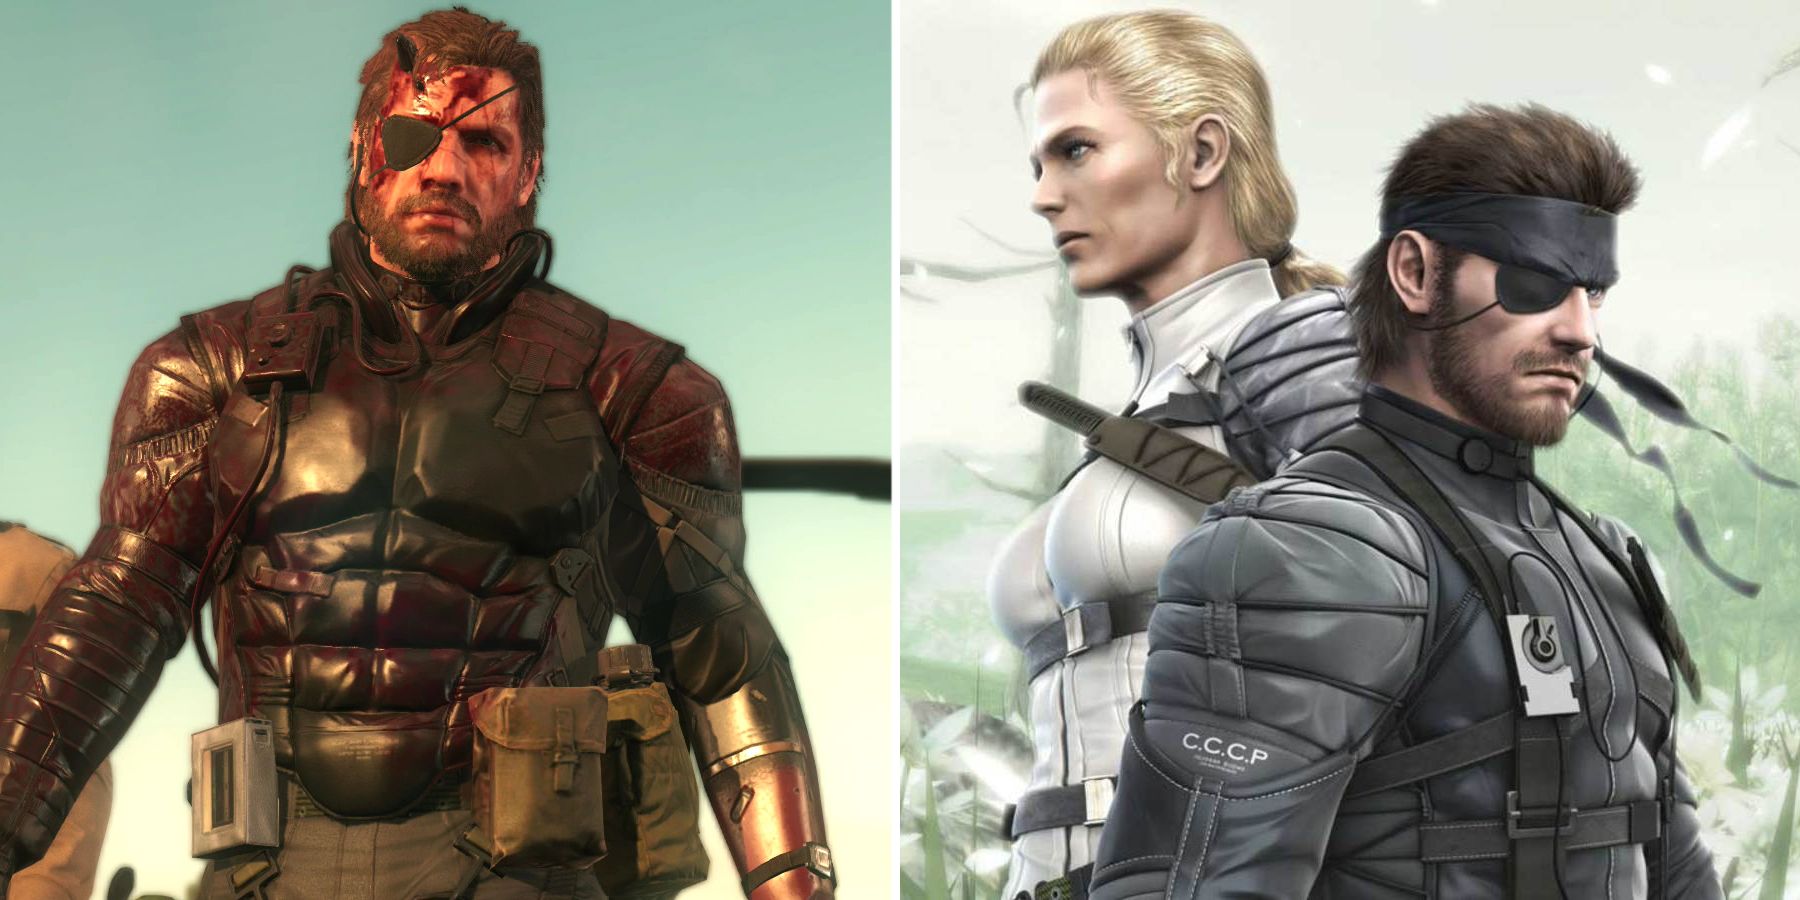 Venom Snake from Metal Gear Solid V and The Boss and Naked Snake from Metal Gear Solid 3